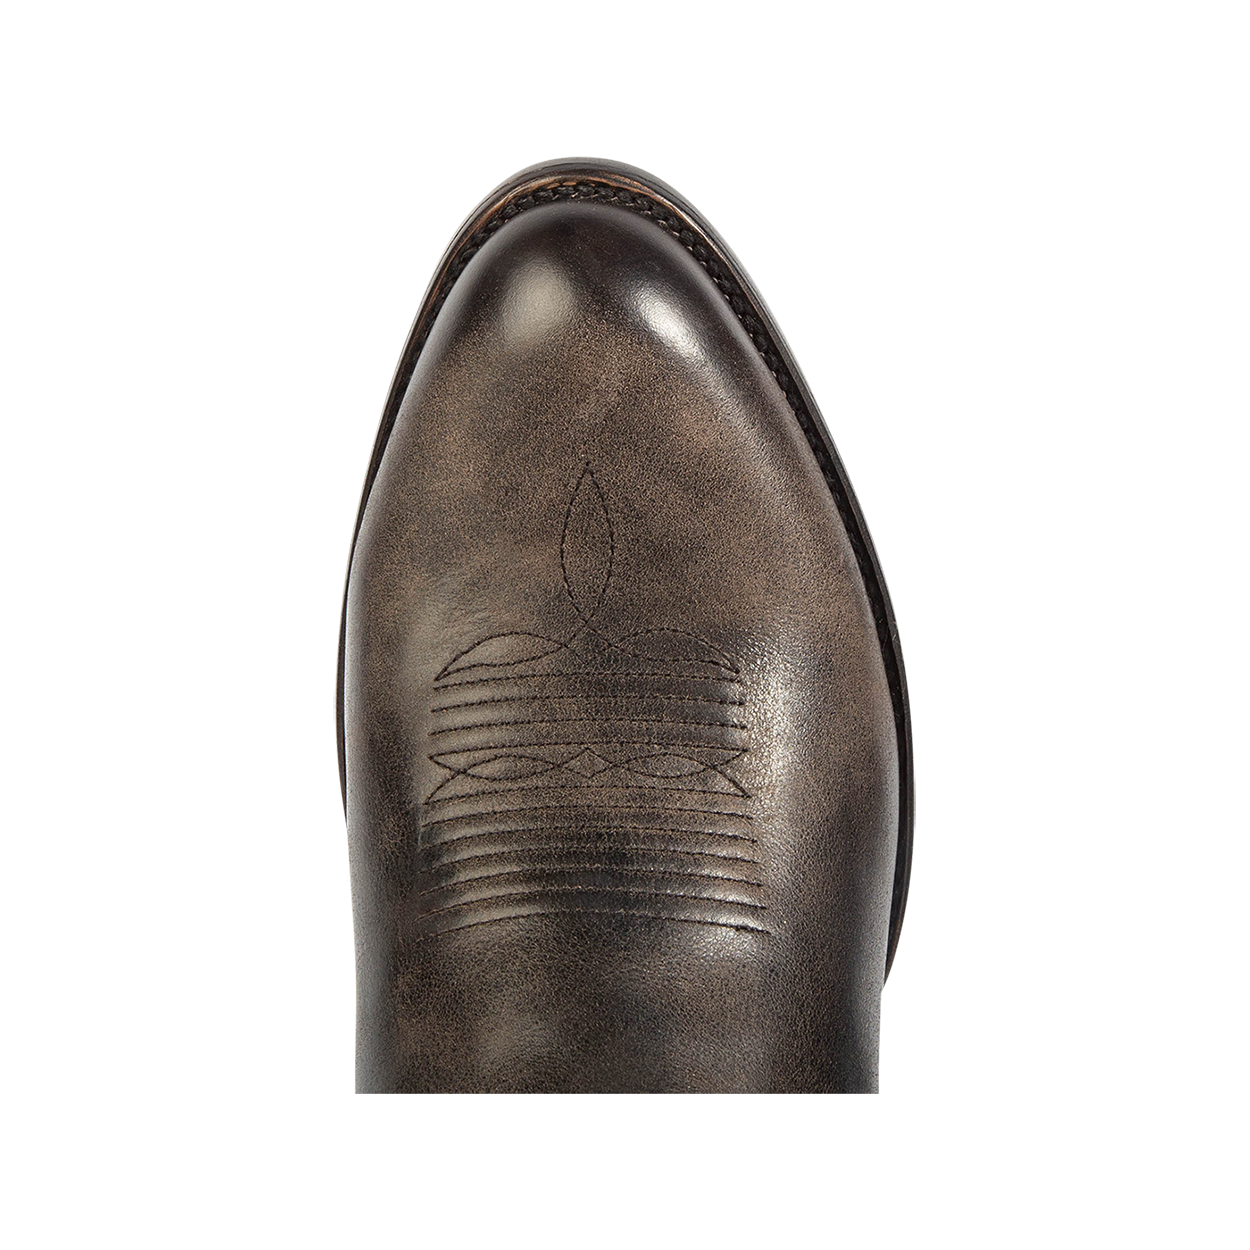 Top view showing traditional toe shape and stitch detailing on FREEBIRD men's Bandito black leather boot